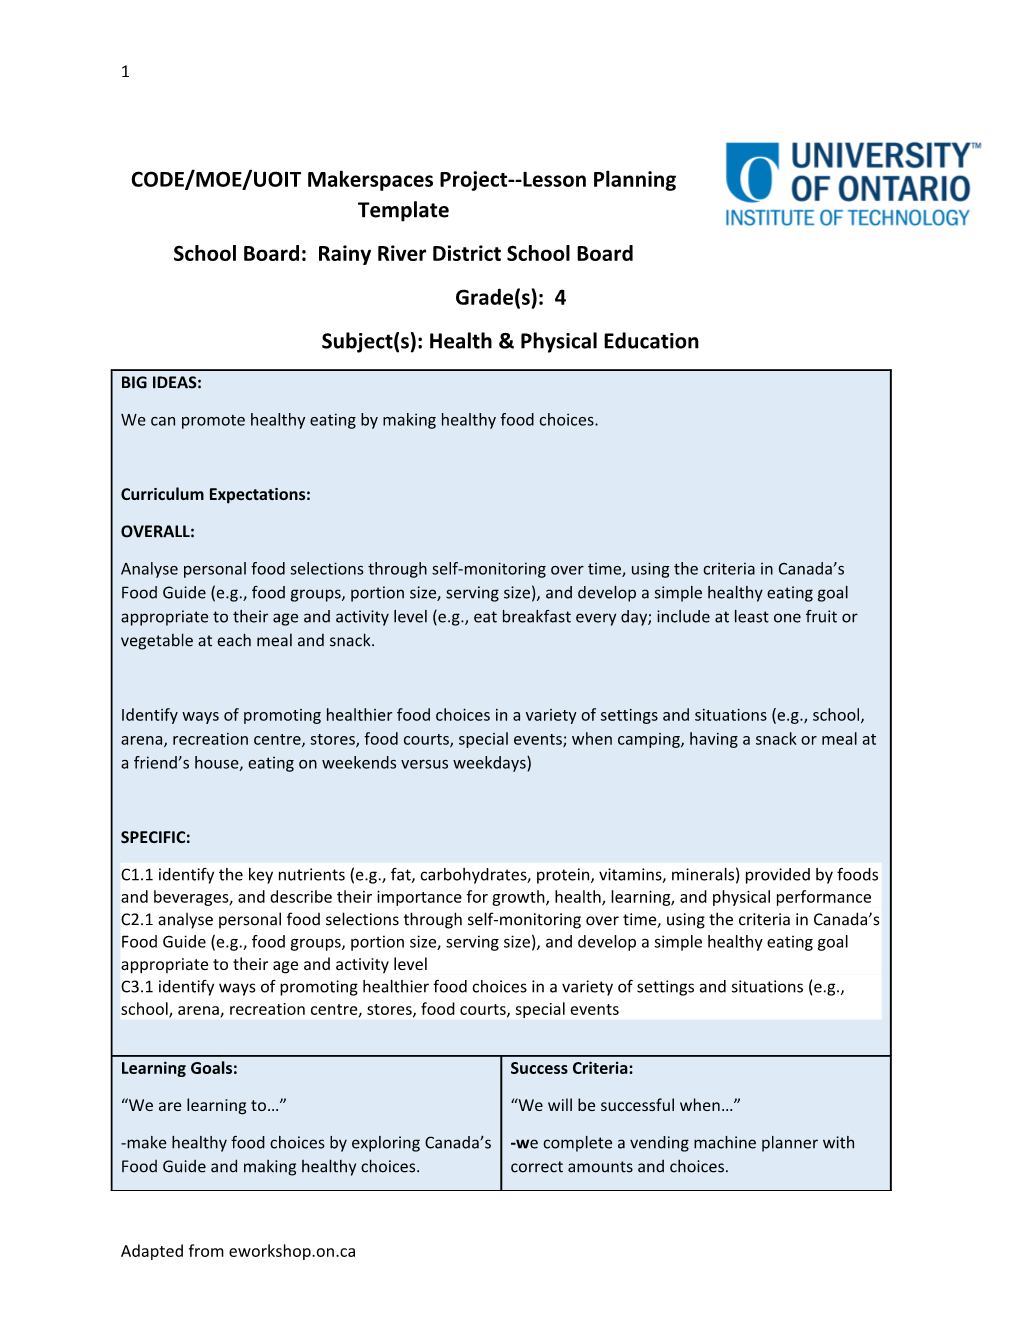 CODE/MOE/UOIT Makerspaces Project Lesson Planning Template